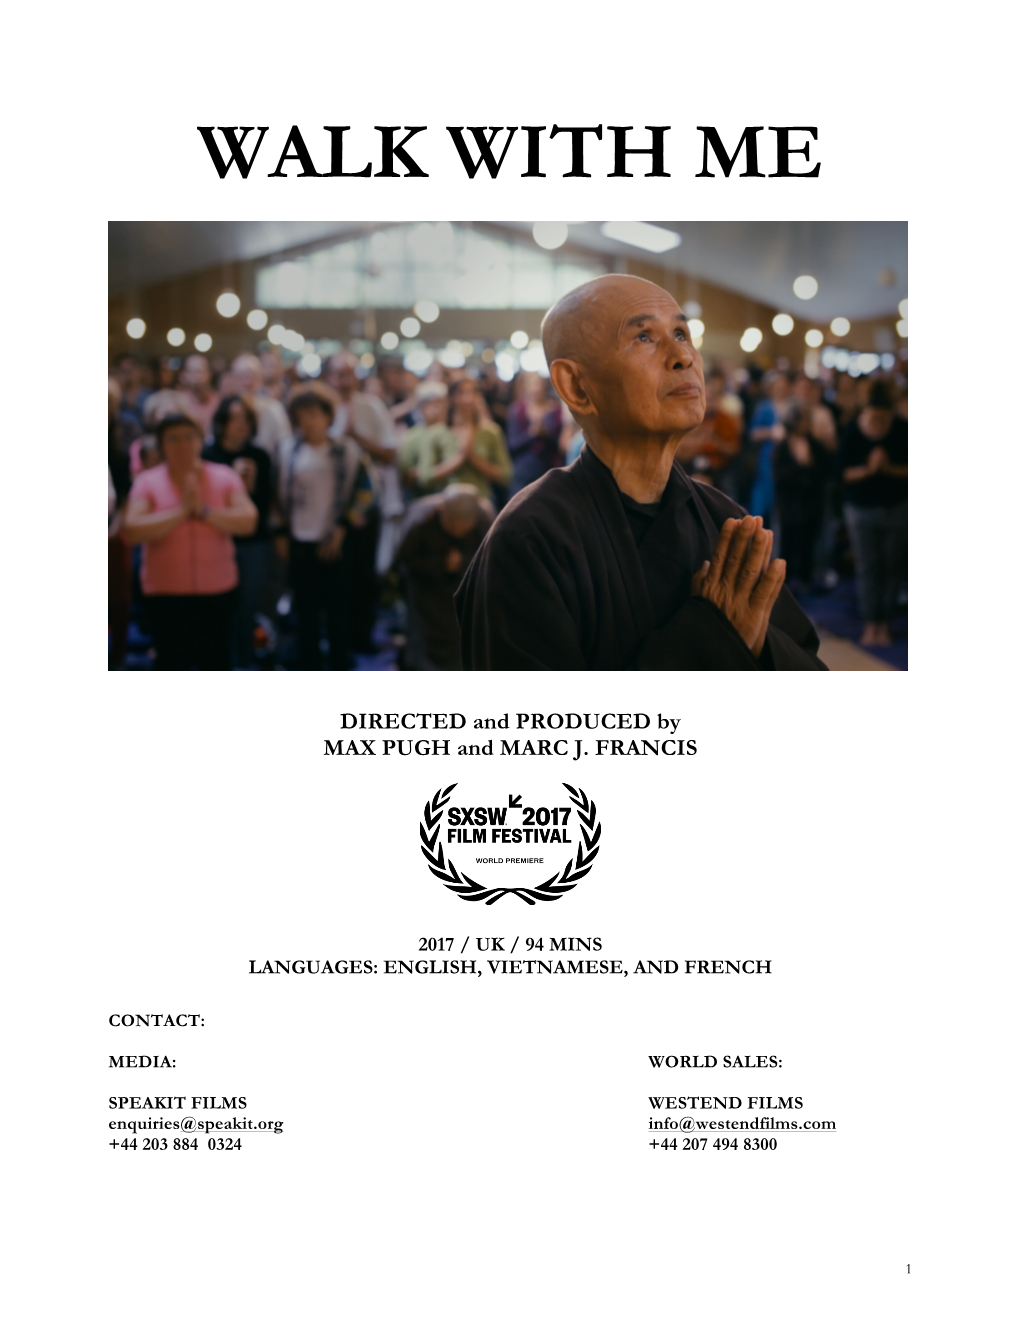 WALK with ME Production Notes